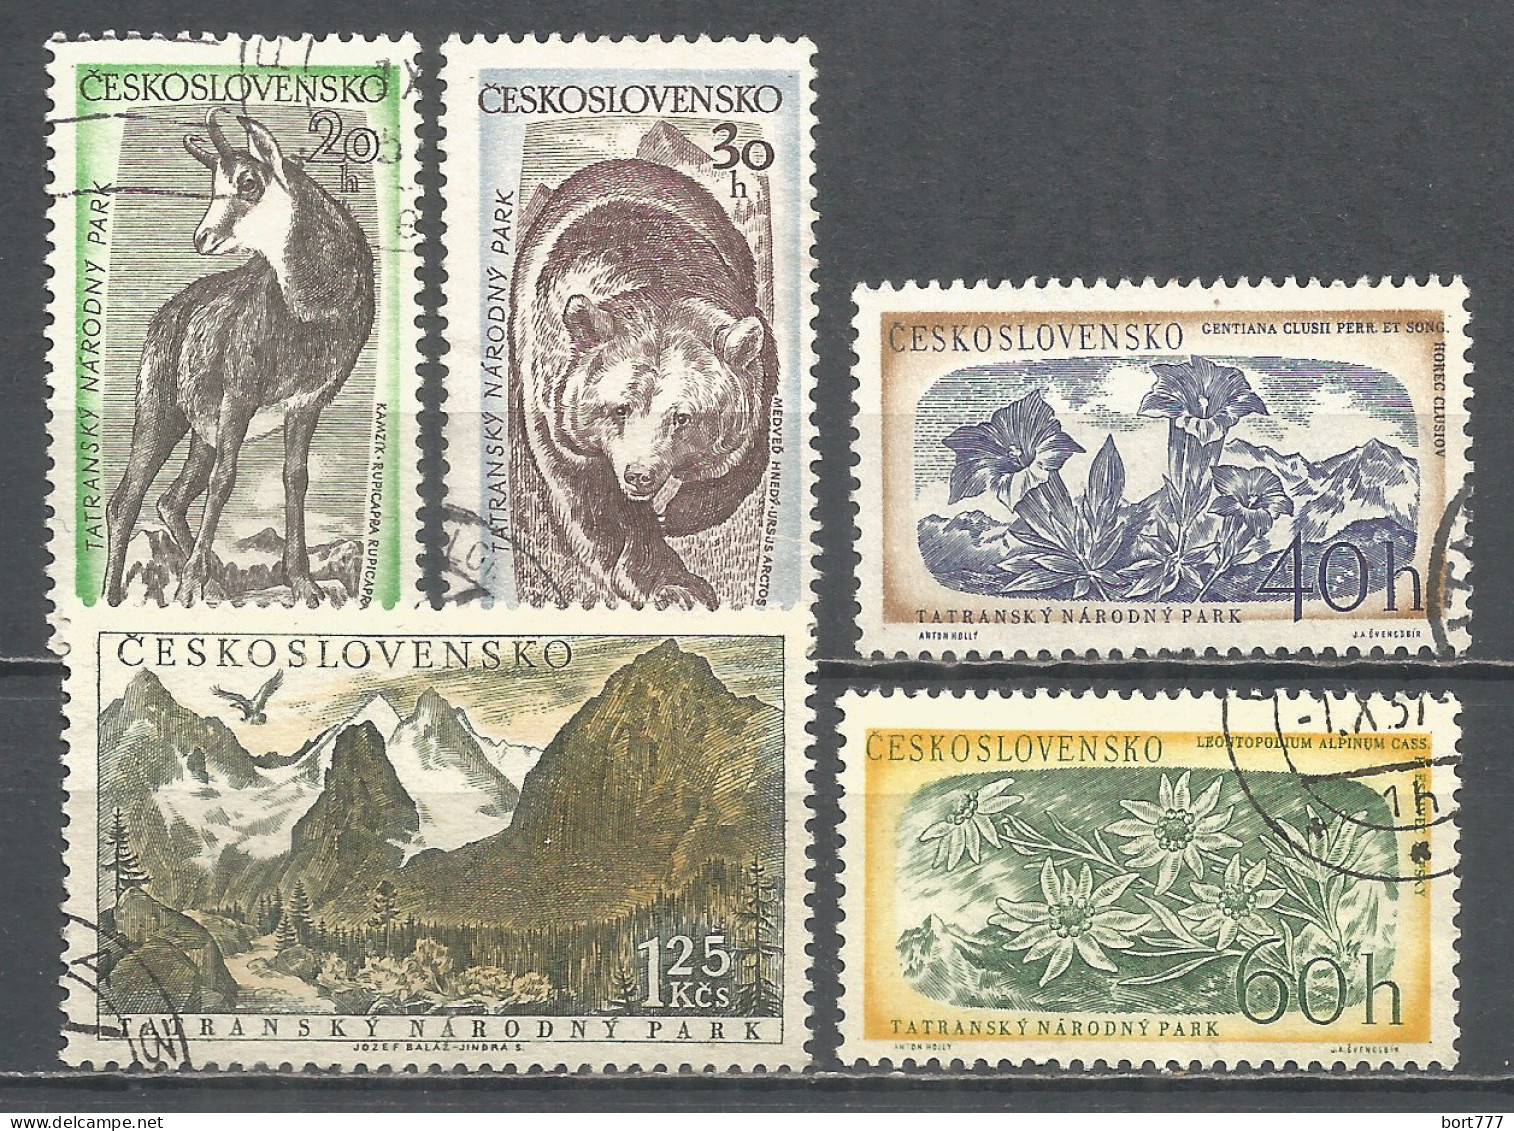 Czechoslovakia 1957 Year Used  Stamps Set - Used Stamps